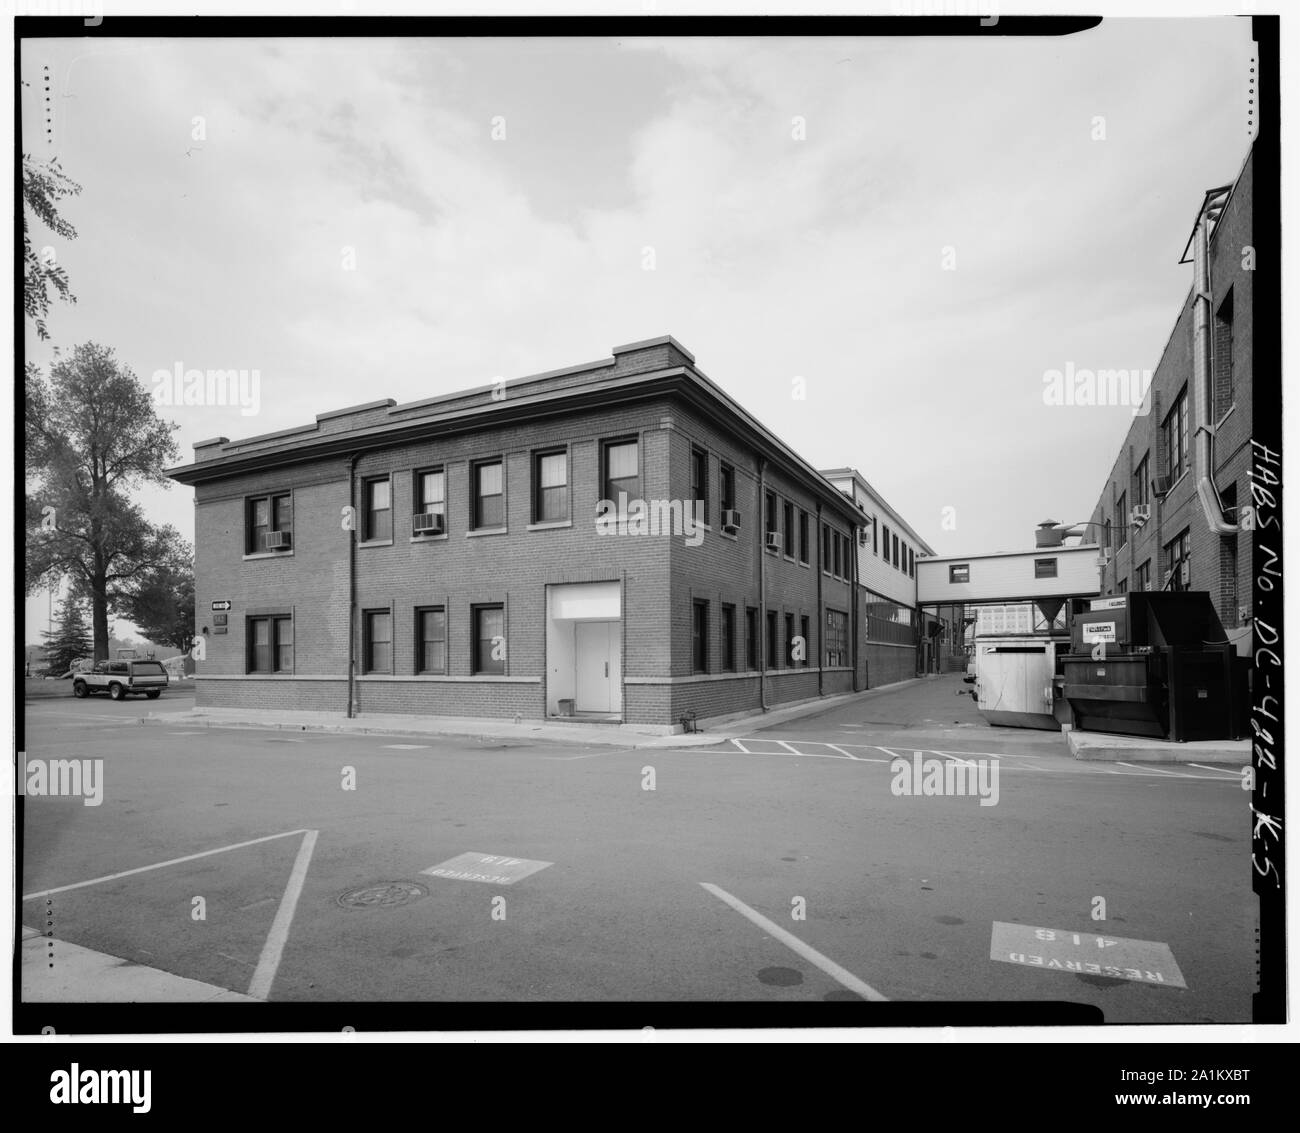 North and east elevations, looking southwest - Navy Yard, Building No. 142,; North and east elevations, looking southwest - Navy Yard, Building No. 142, Intersection of Sicard Street & Patterson Avenue, Washington, District of Columbia, DC; Stock Photo